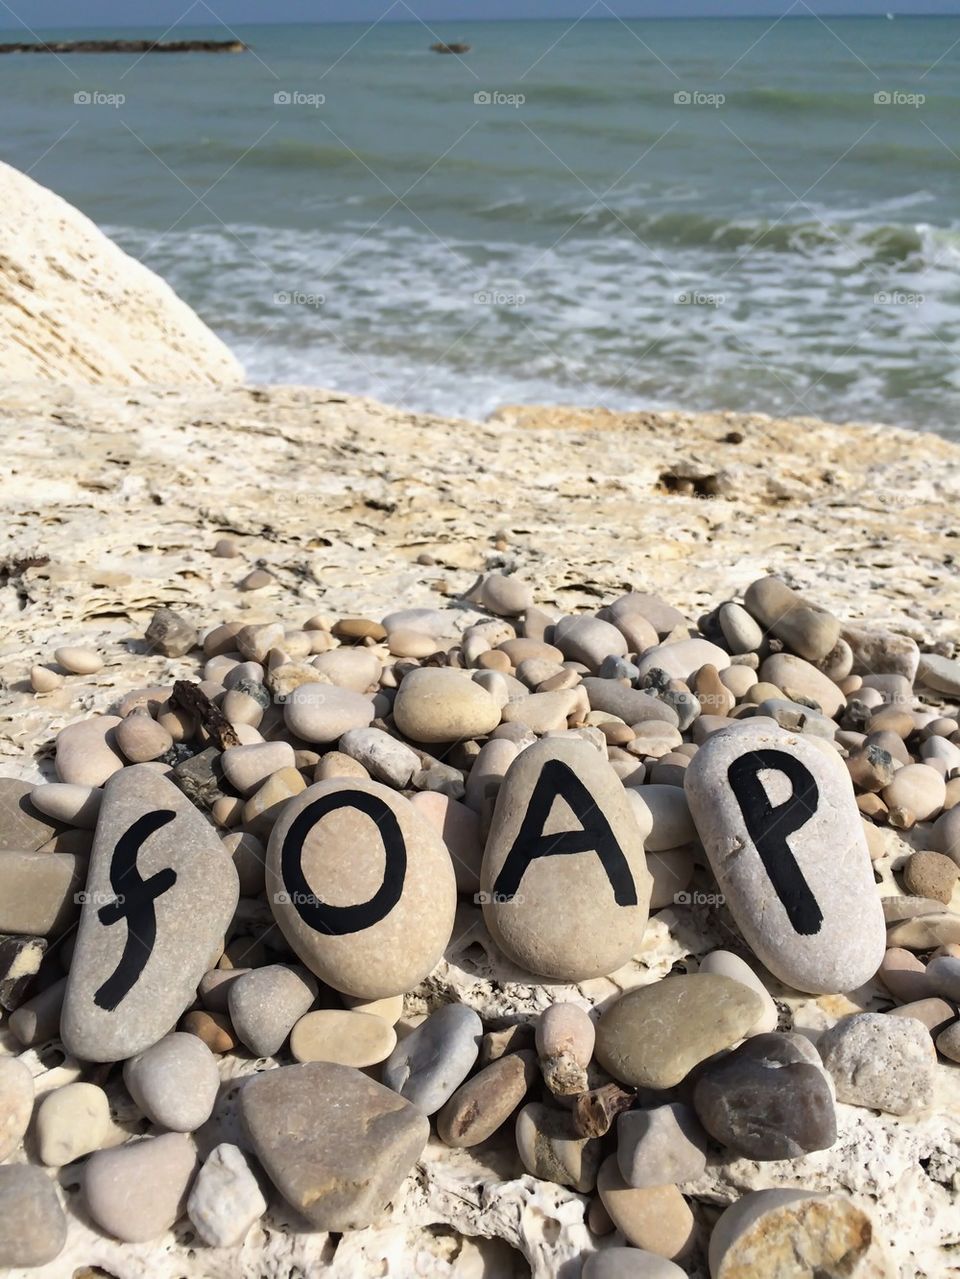 Foap on stones with black letters